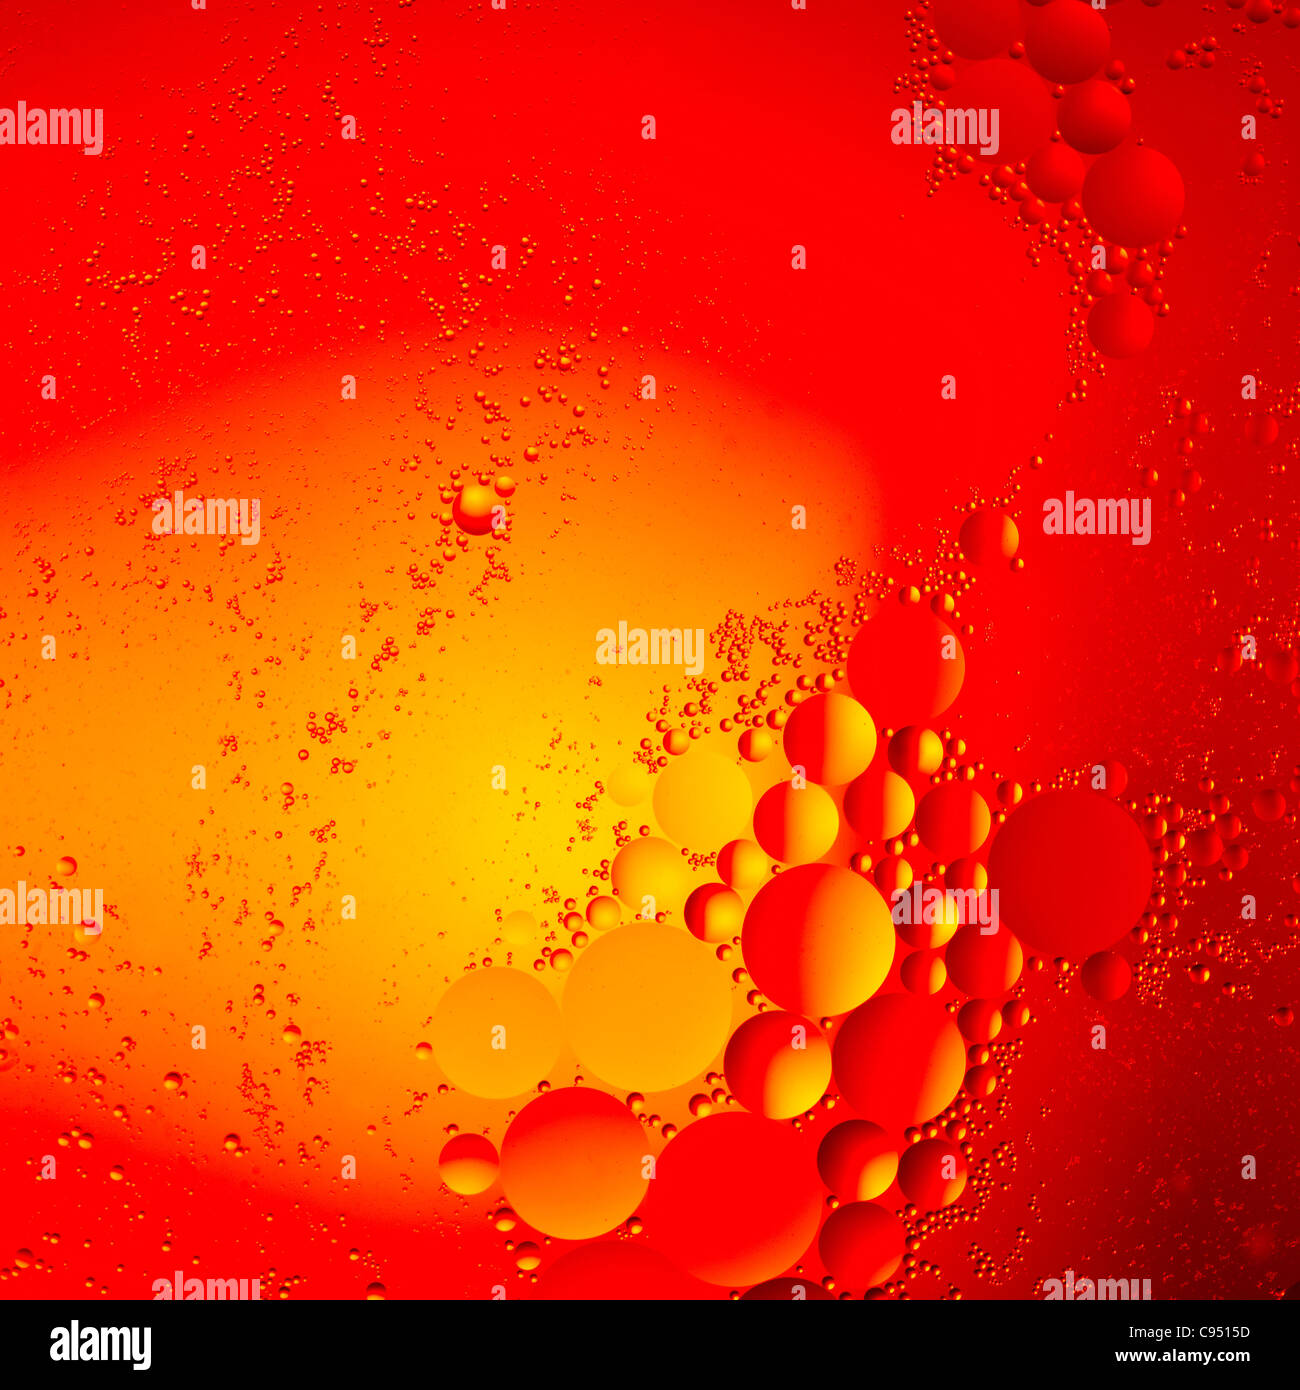 Abstract-Oil Drops in Water Stock Photo